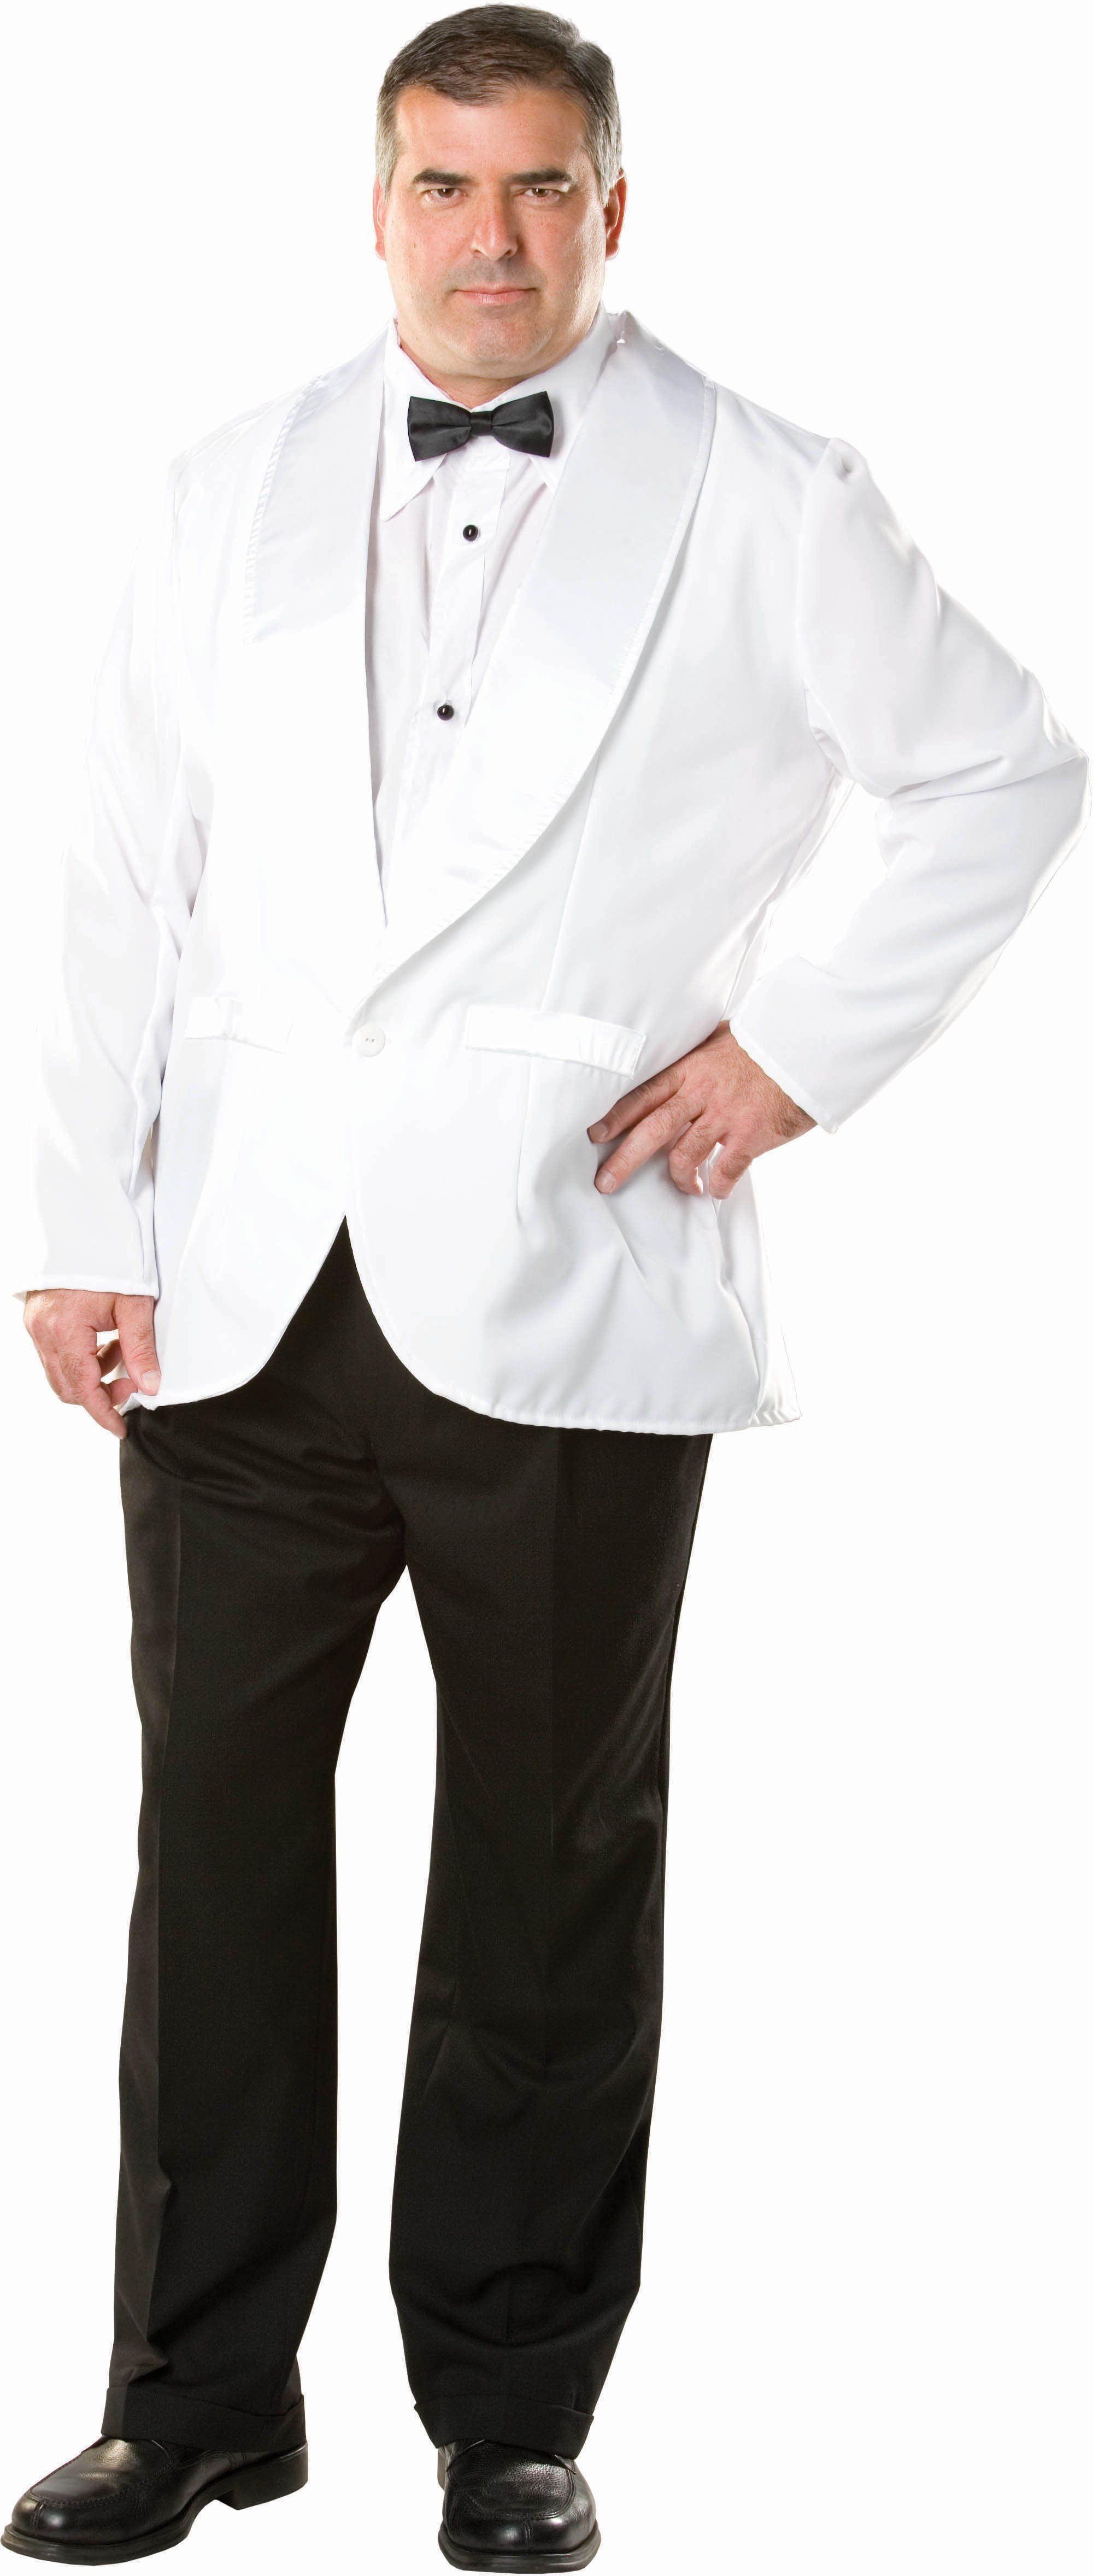 White Dinner Jacket Adult Plus Costume - DO NOT ACTIVATE